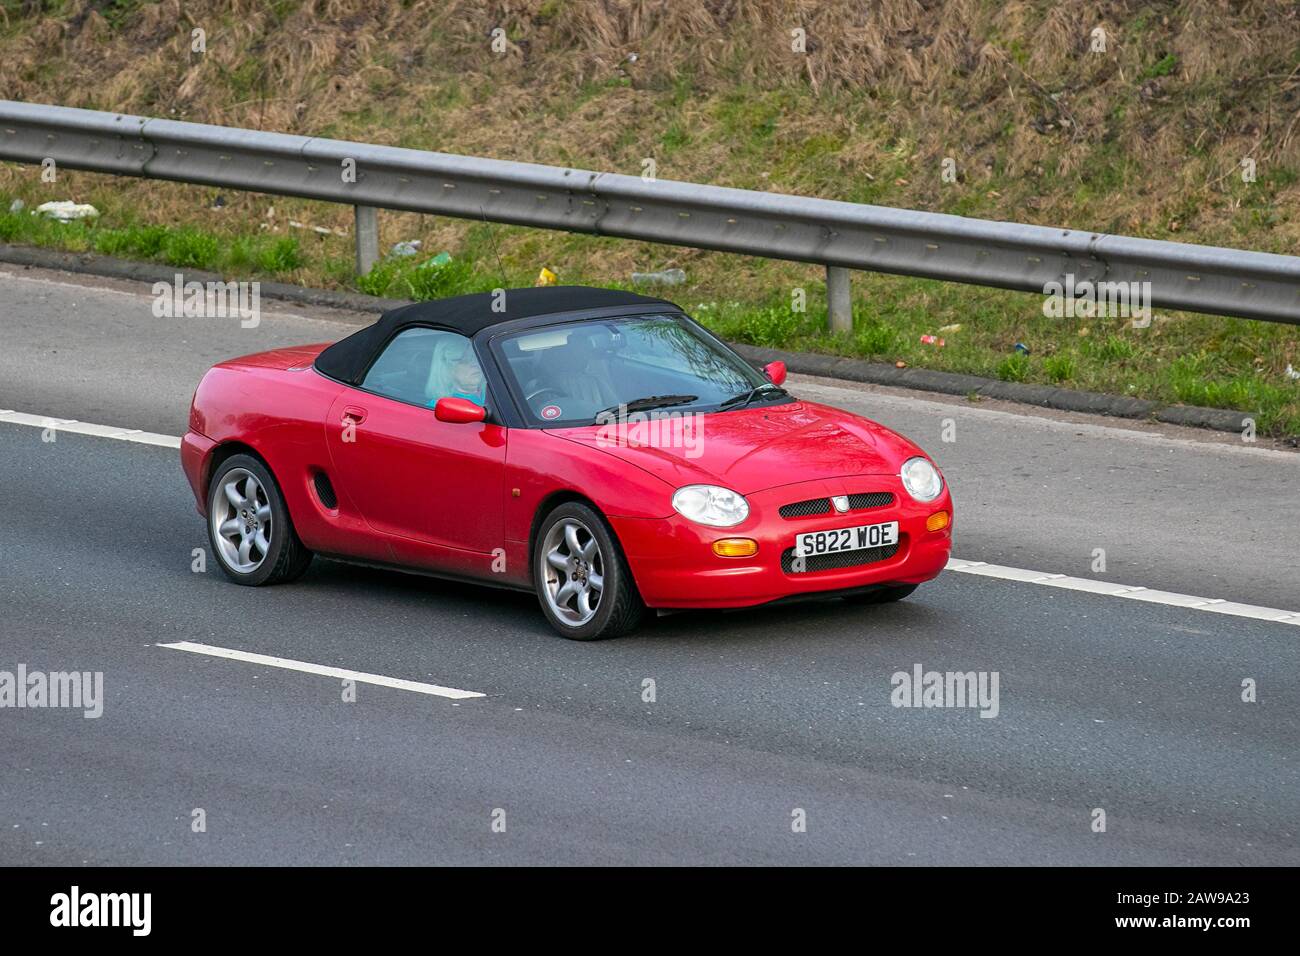 1998 red MG MGF 1.8i VVC; UK Vehicular traffic, transport, modern, saloon cars, on the M61 motorway highway. UK Stock Photo